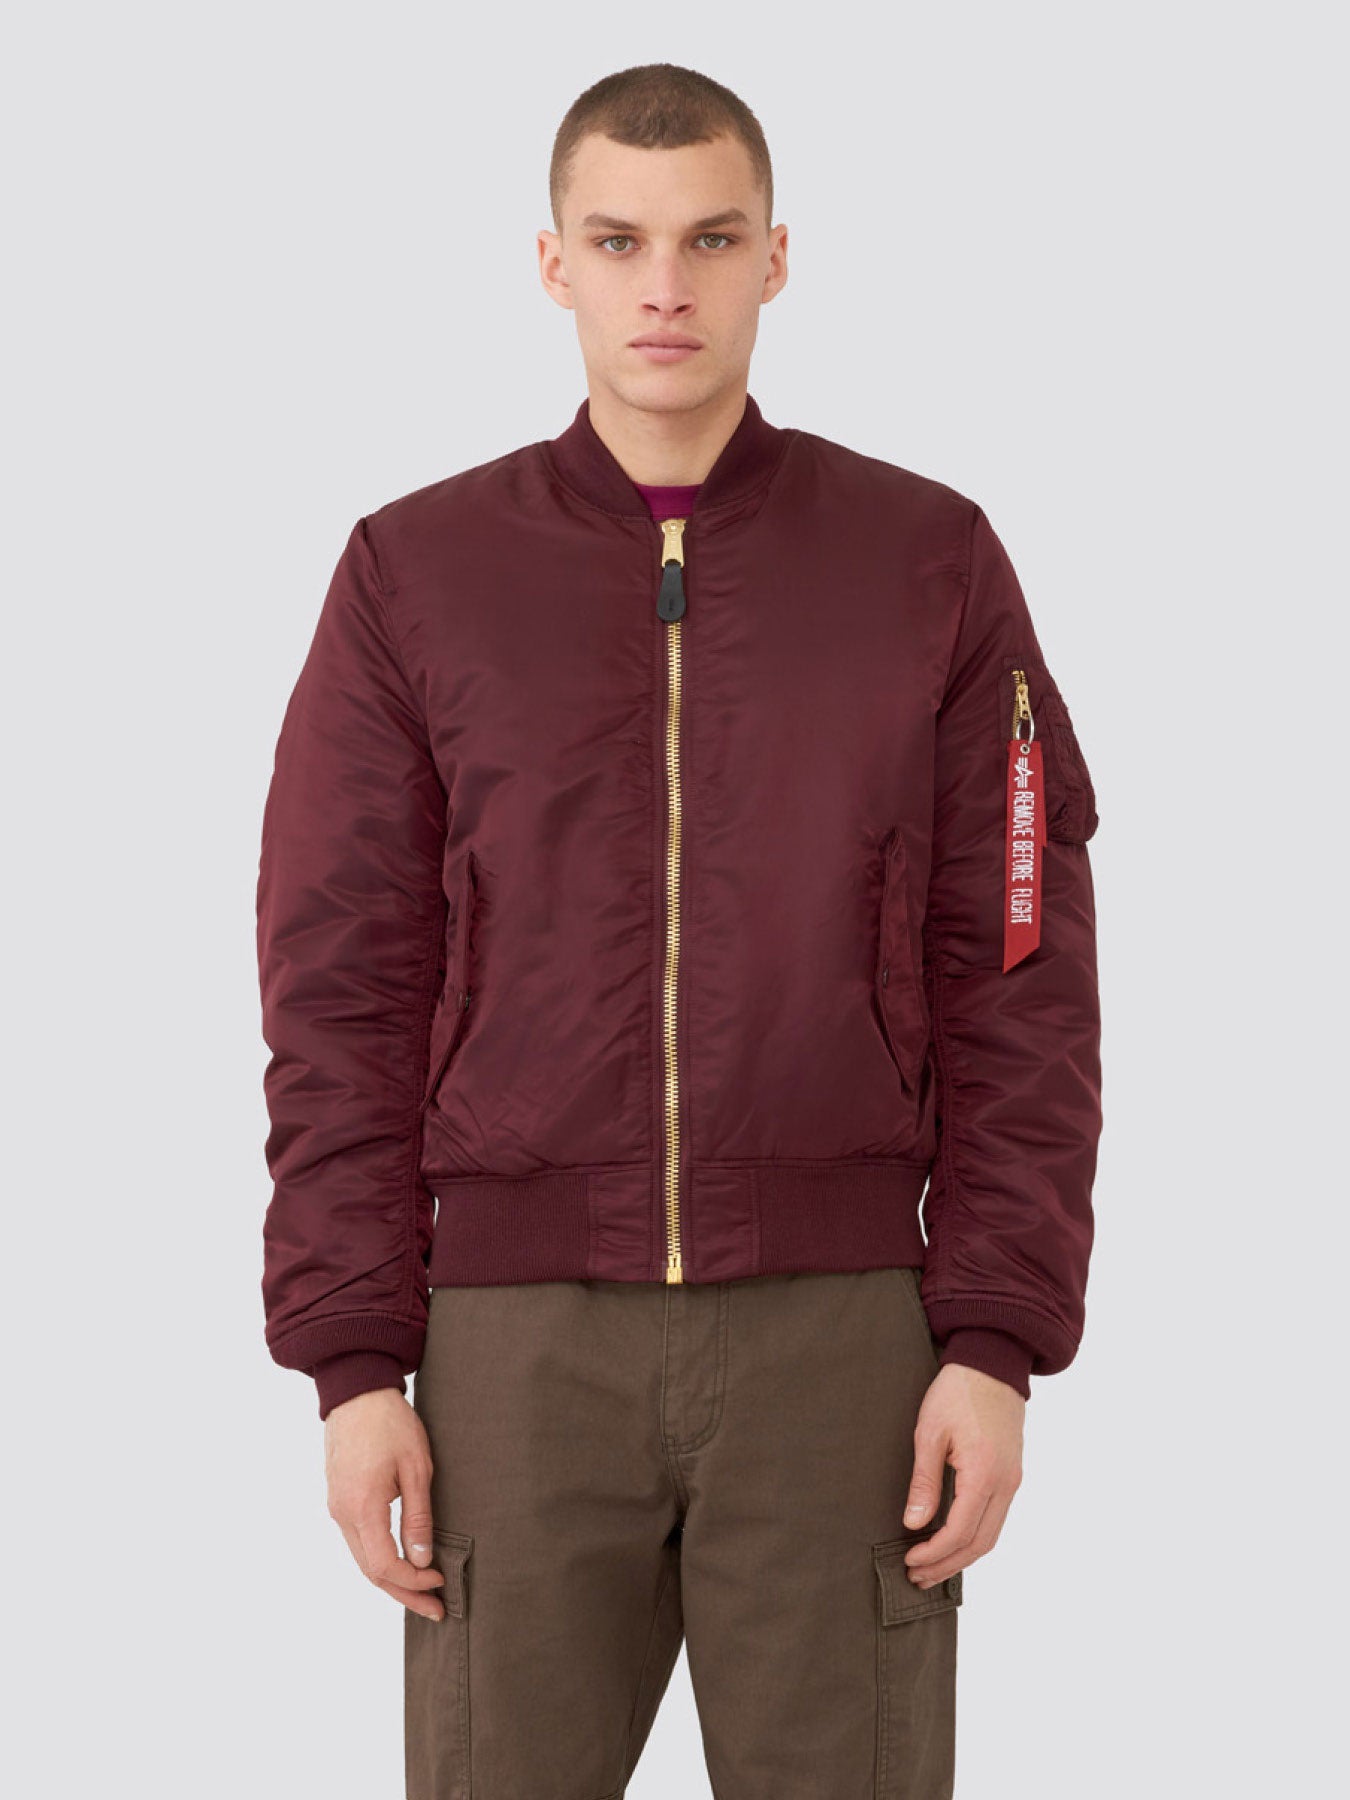 – ALPHA INDUSTRIES Posers Hollywood Jacket Bomber